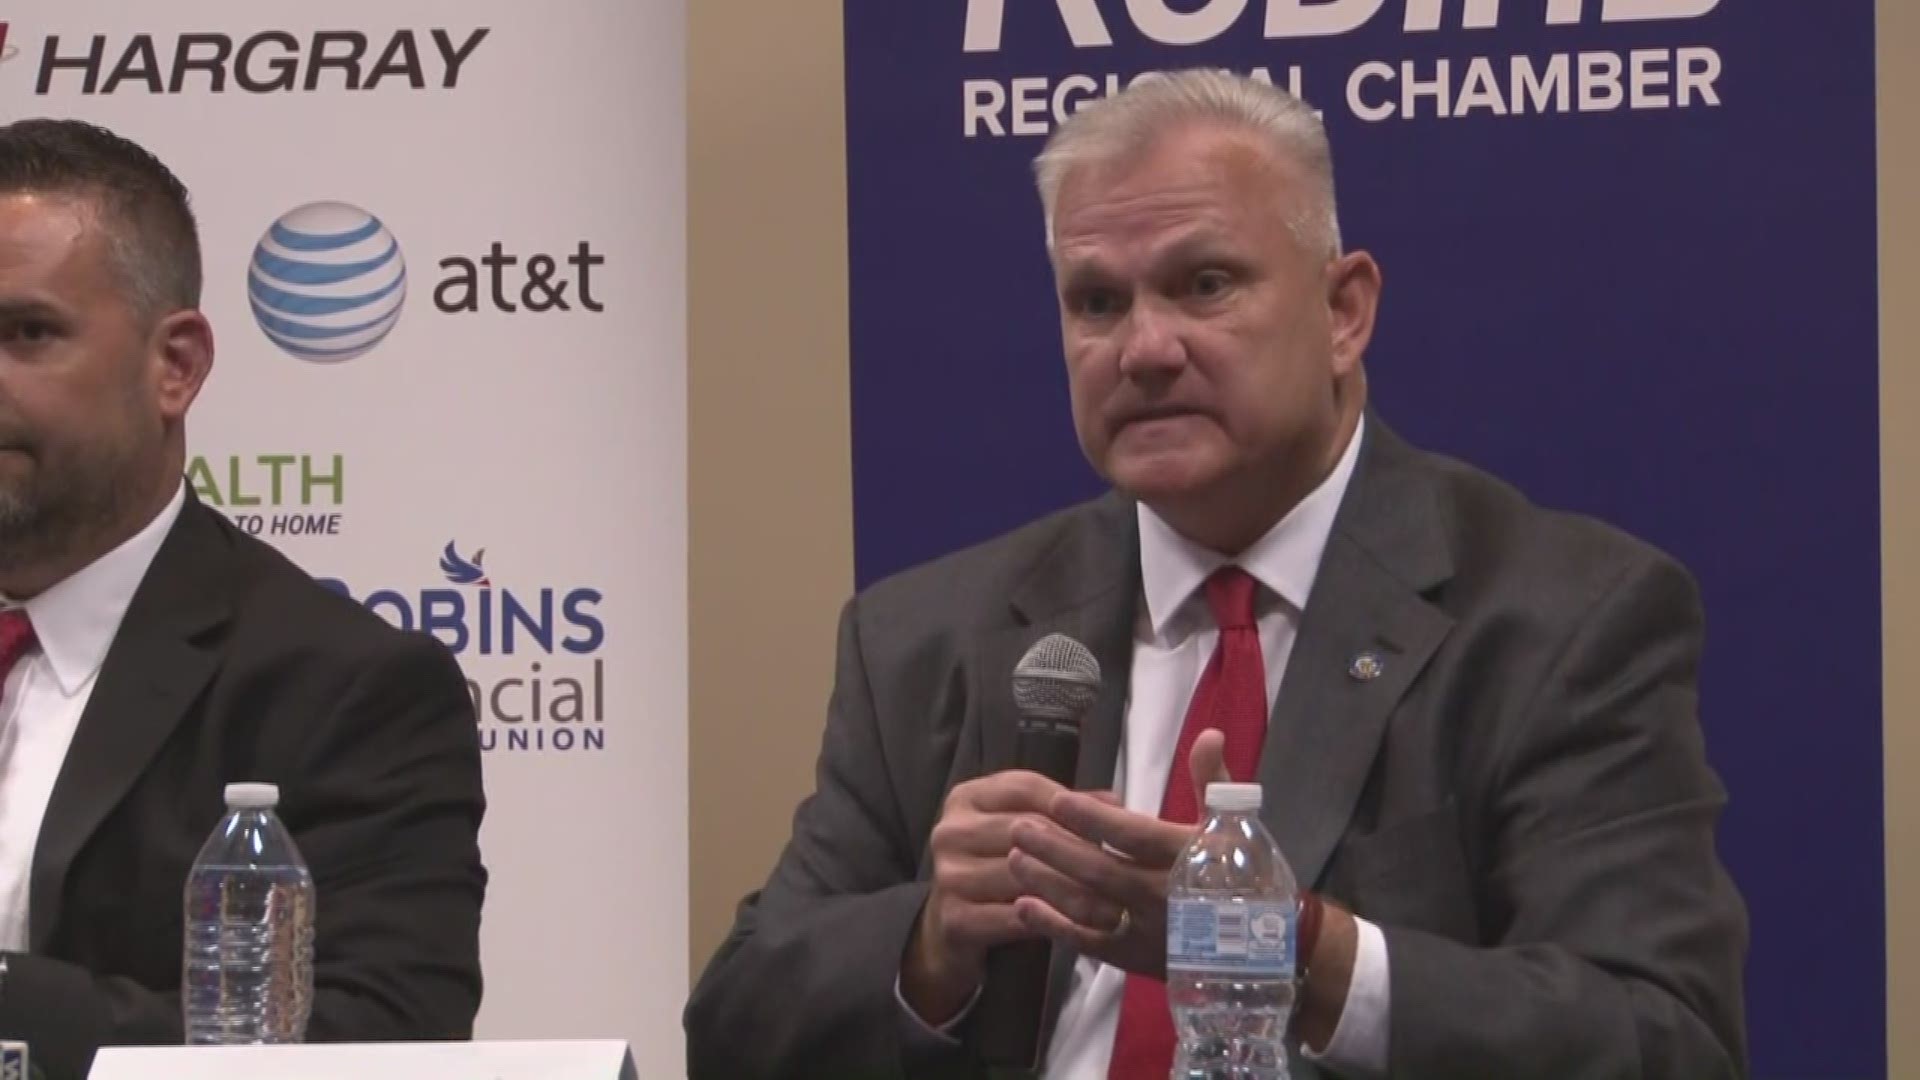 People in Warner Robins heard from city council candidates in a Robins Regional Chamber political forum held at the Central Georgia Technical College auditorium.